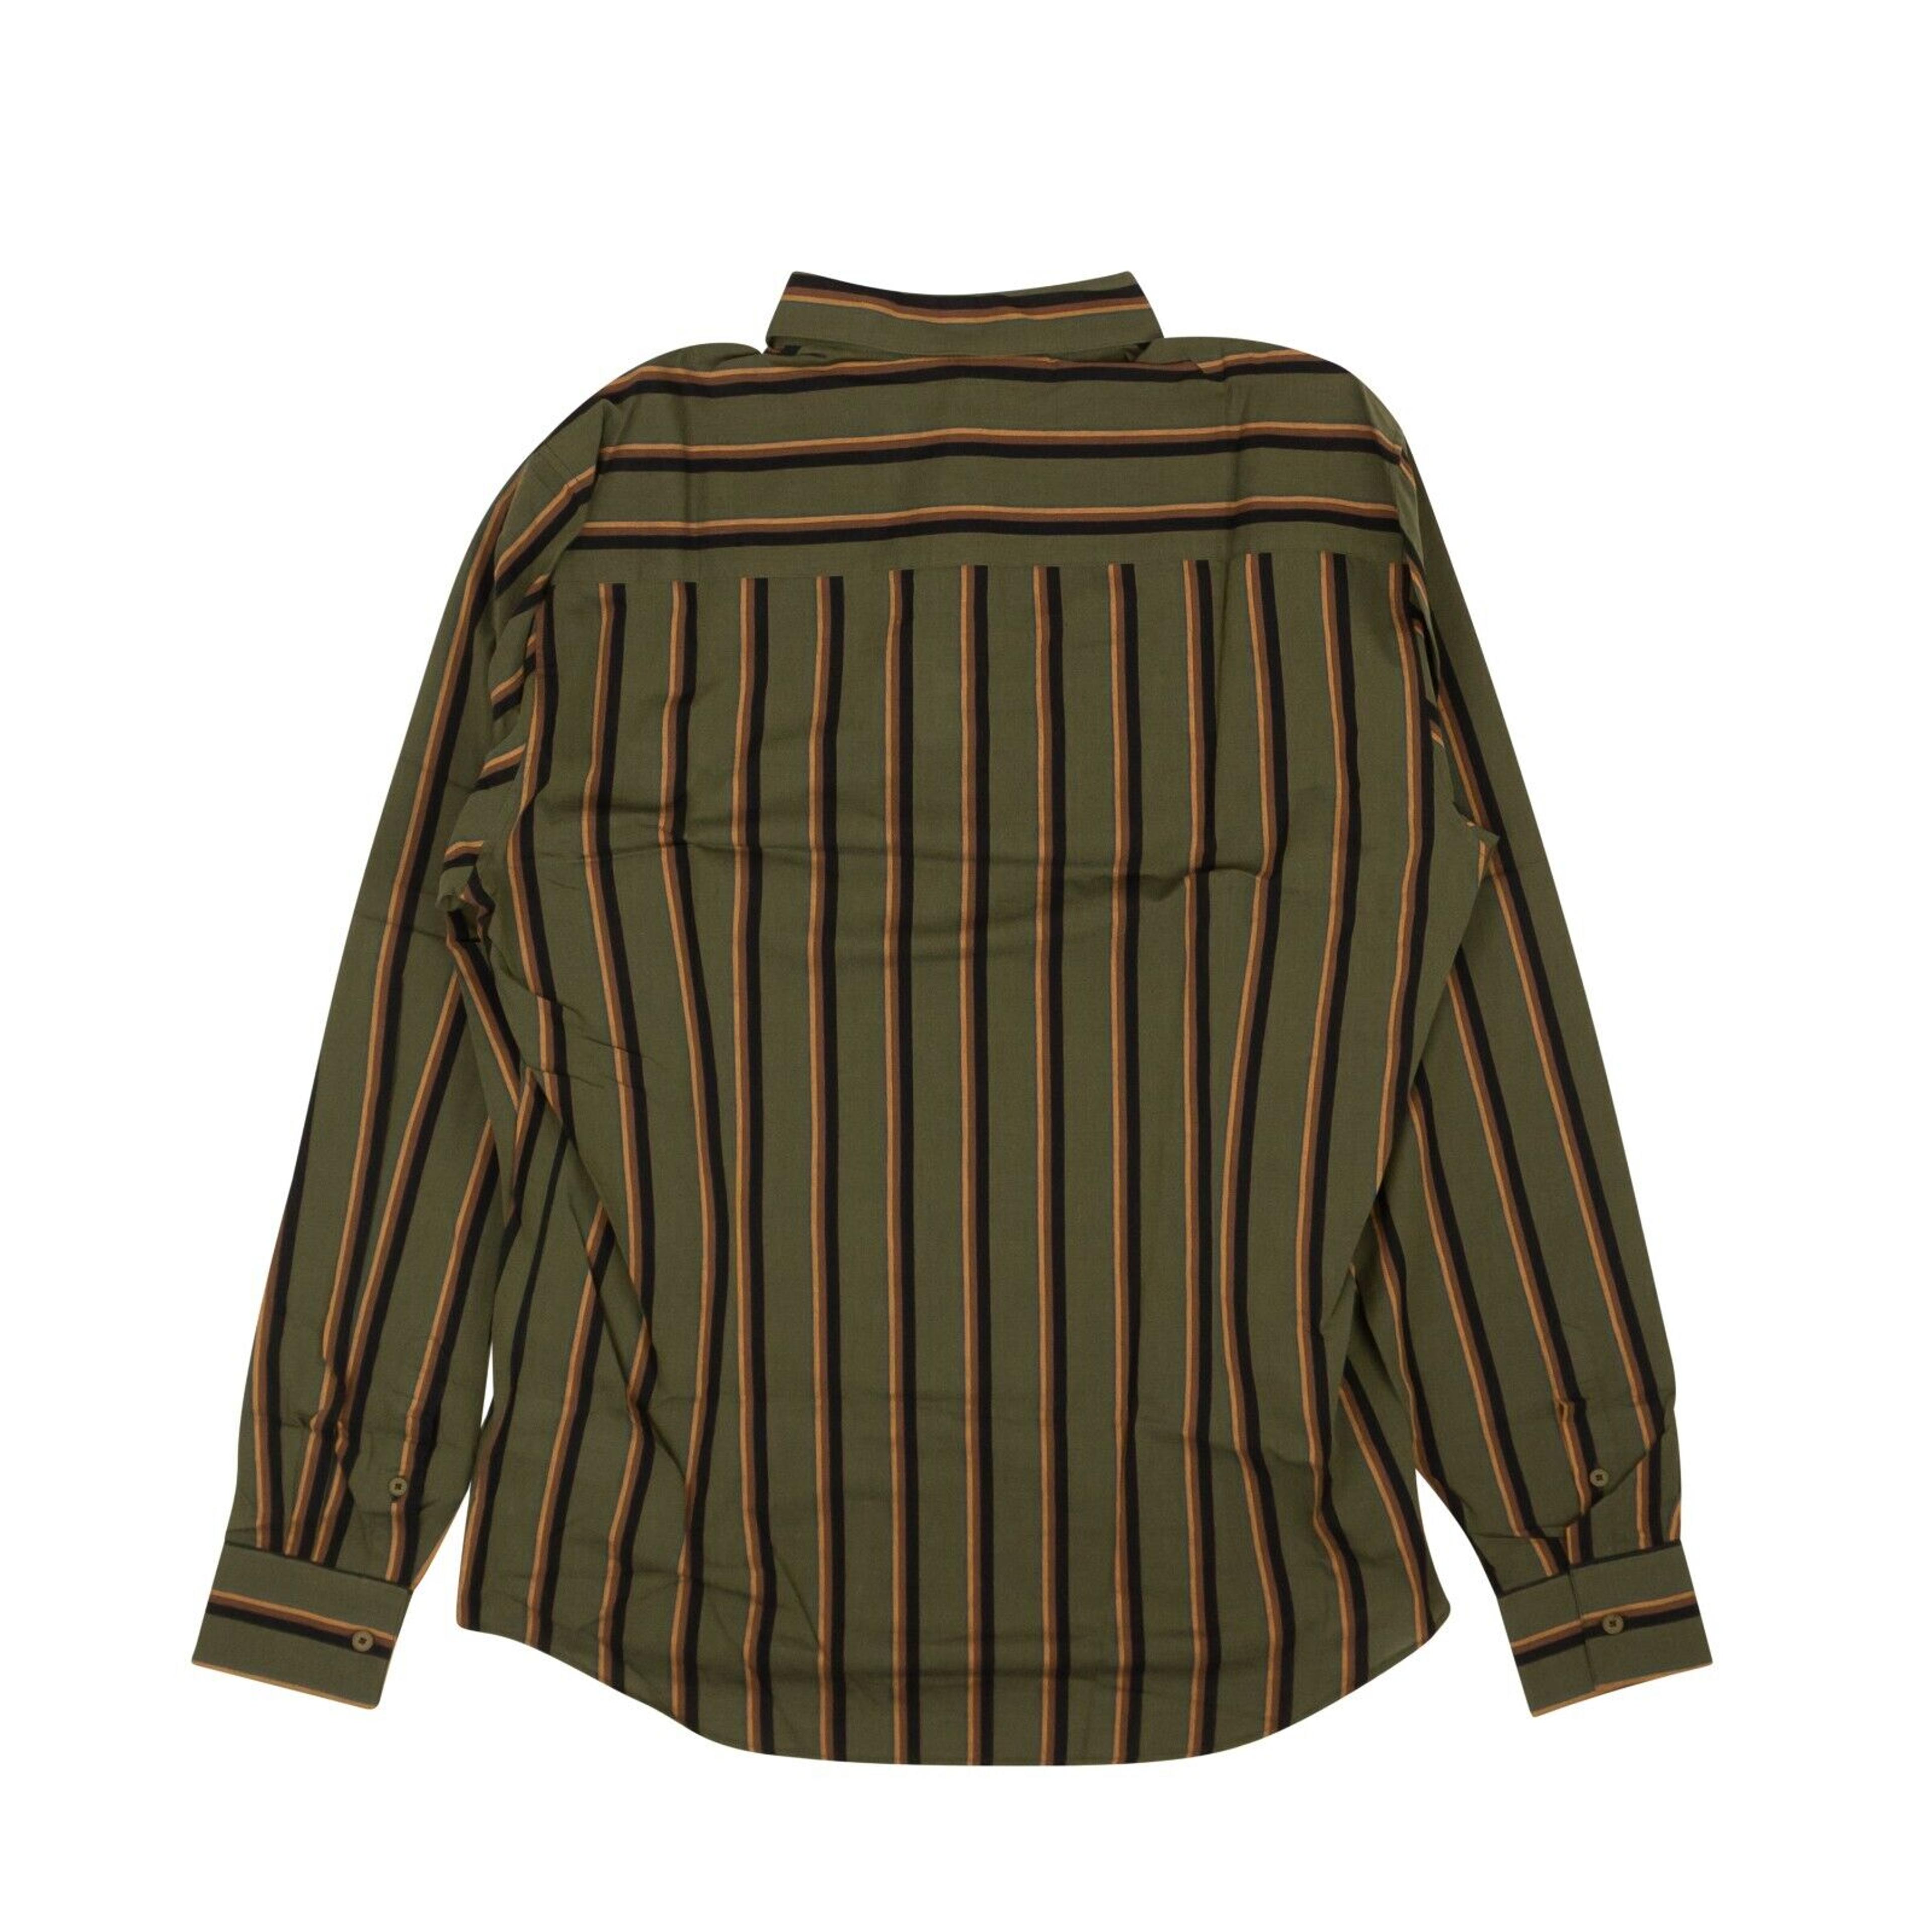 Alternate View 2 of Olive Green Striped Button Down Blouse